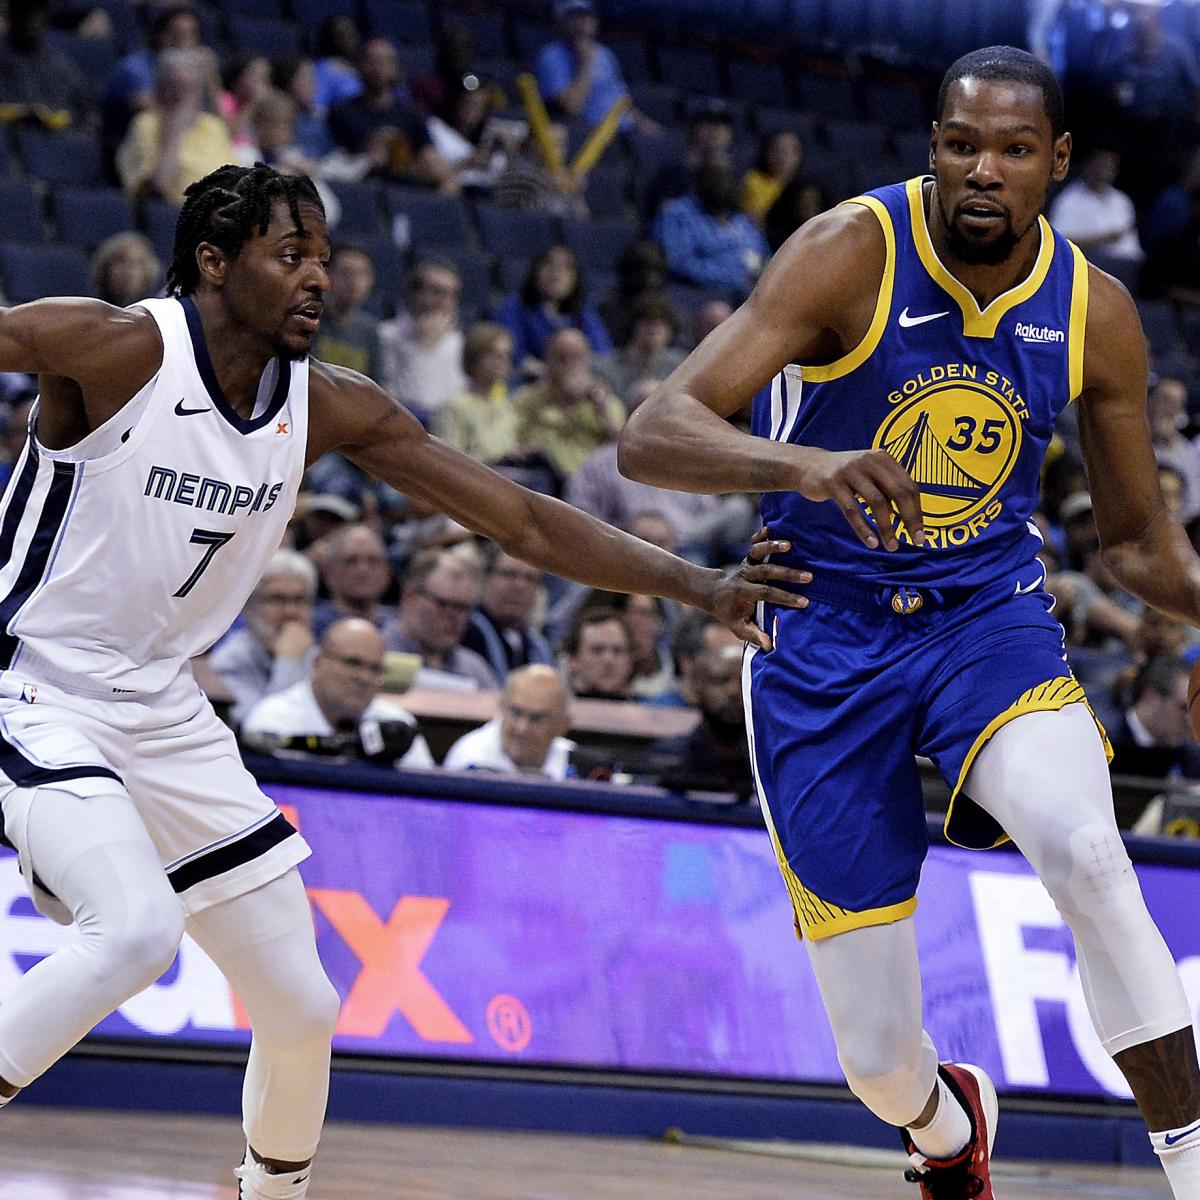 NBA Playoff Schedule 2019: Dates, Matchups, Game Times and TV-Coverage